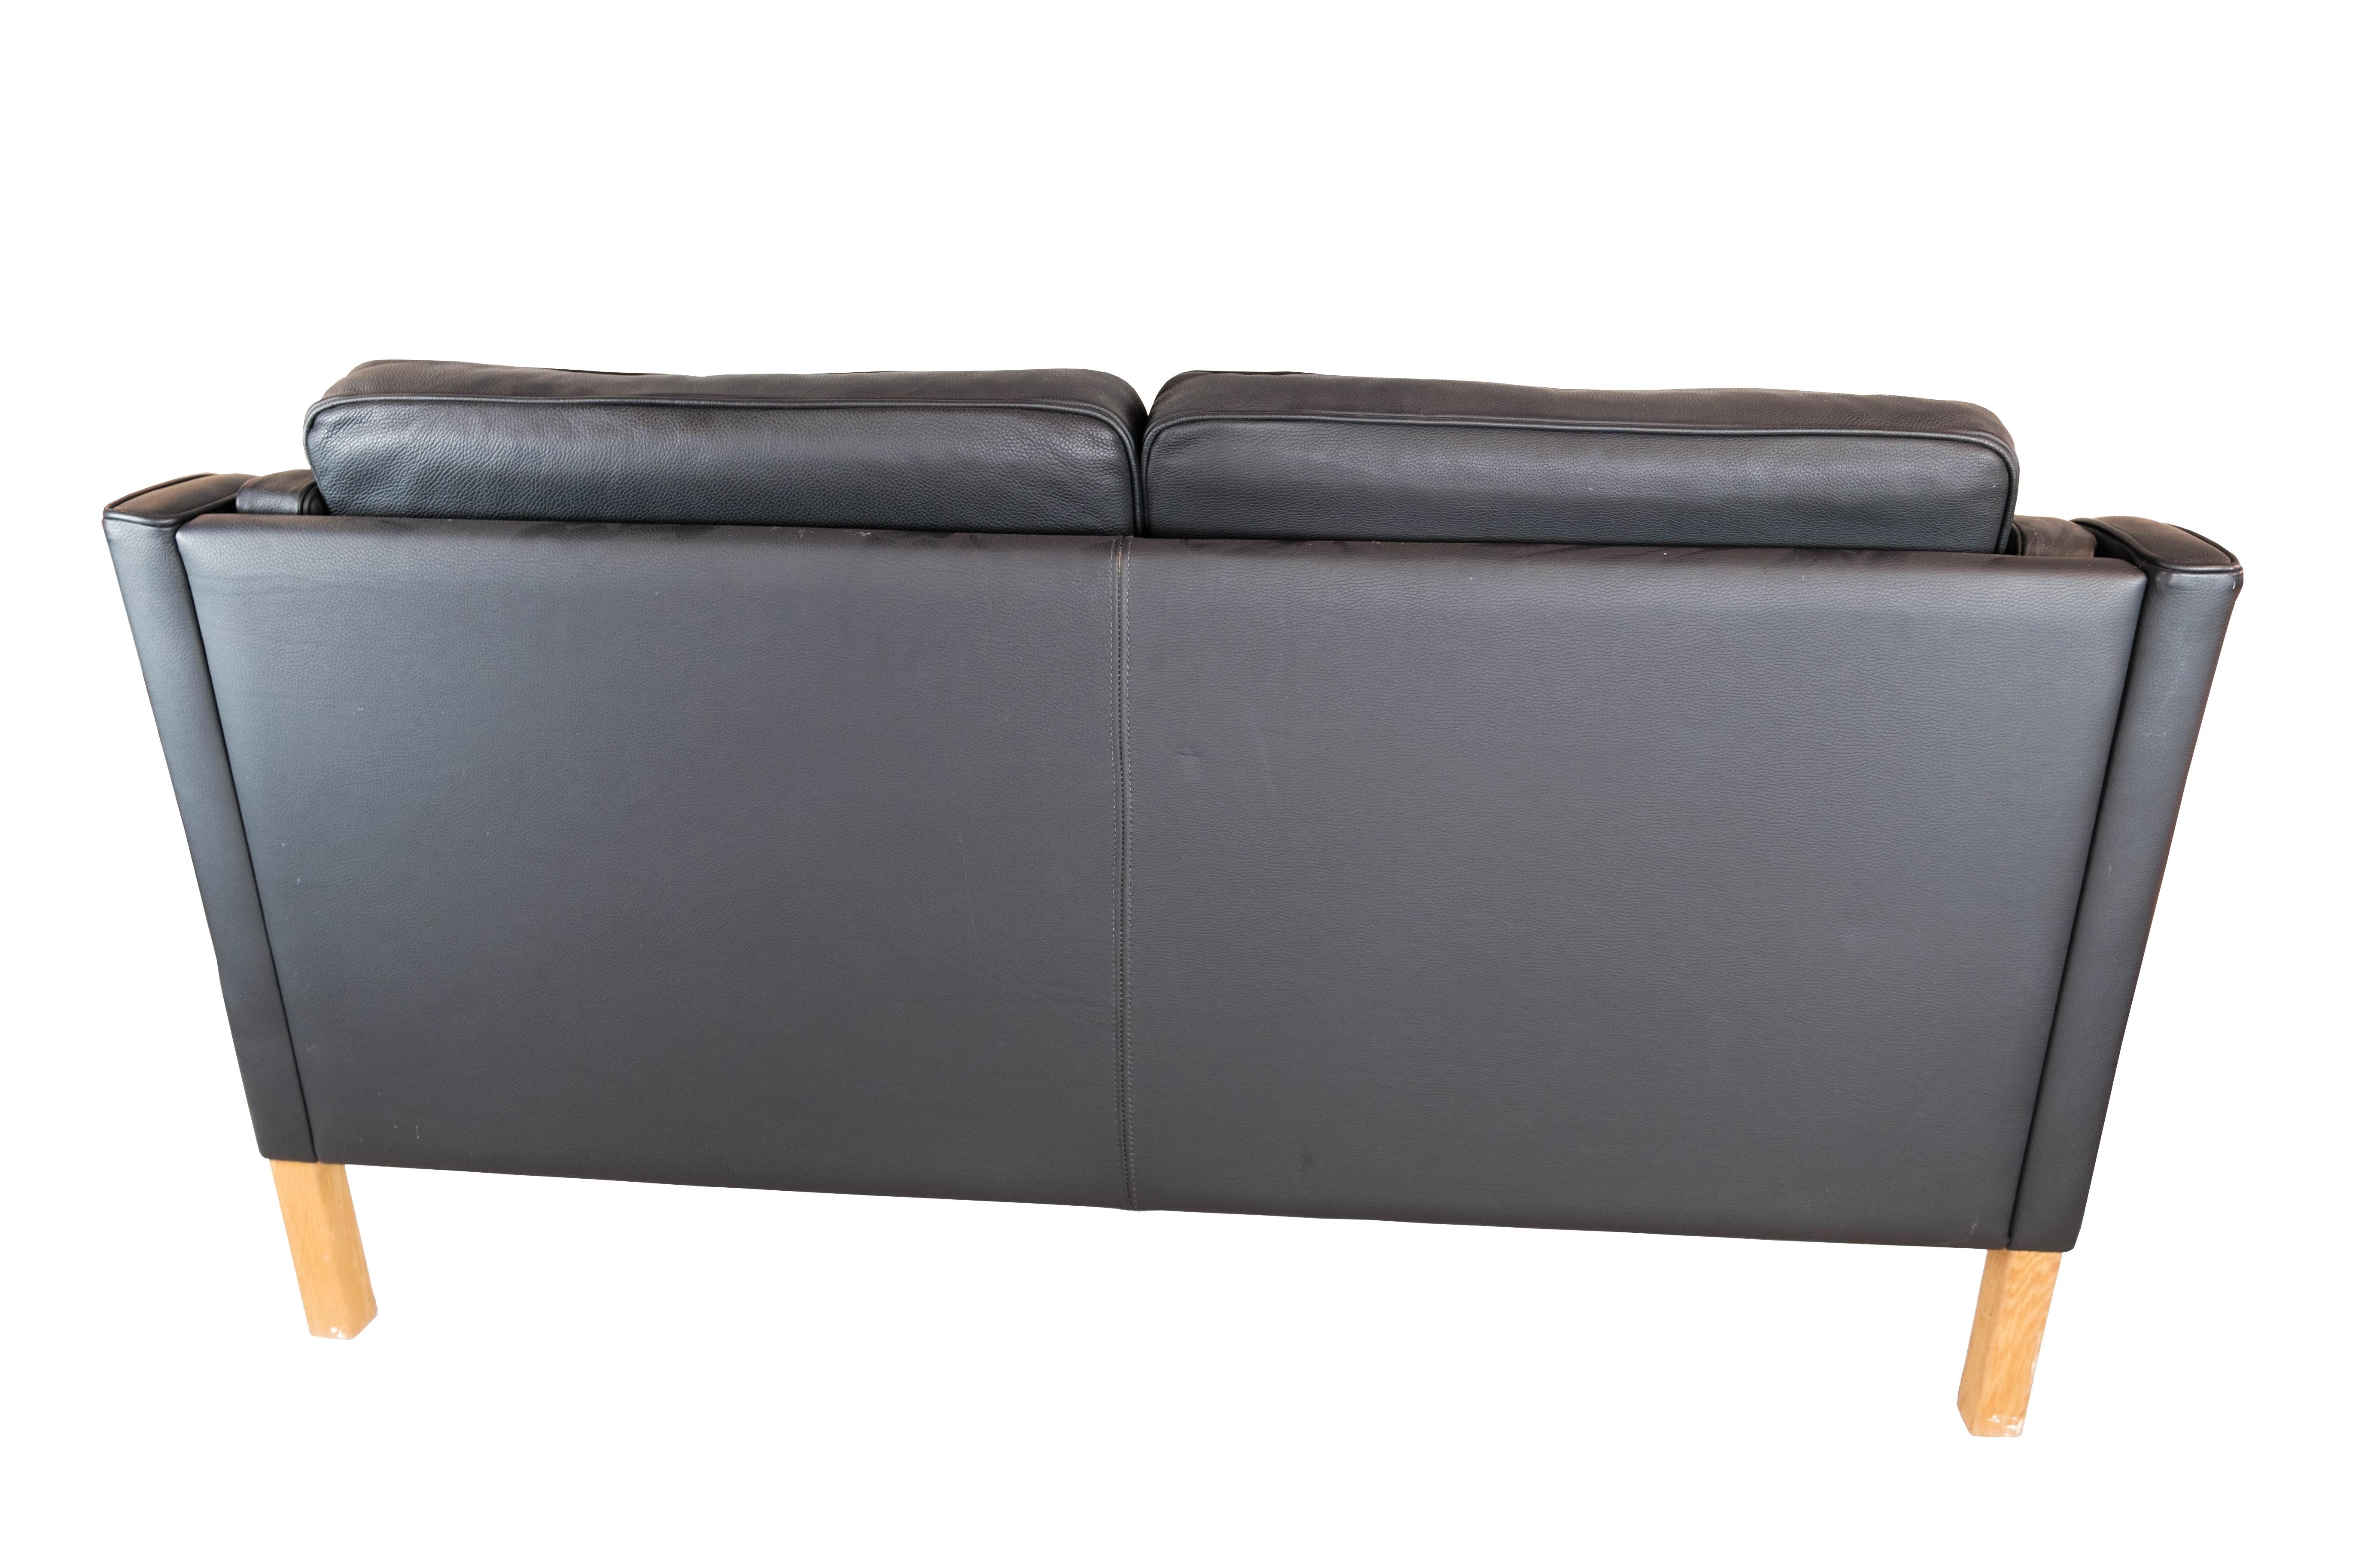 Black Leather 2 Seater Sofa with Legs of Oak, Manufactured by Stouby Furniture 3